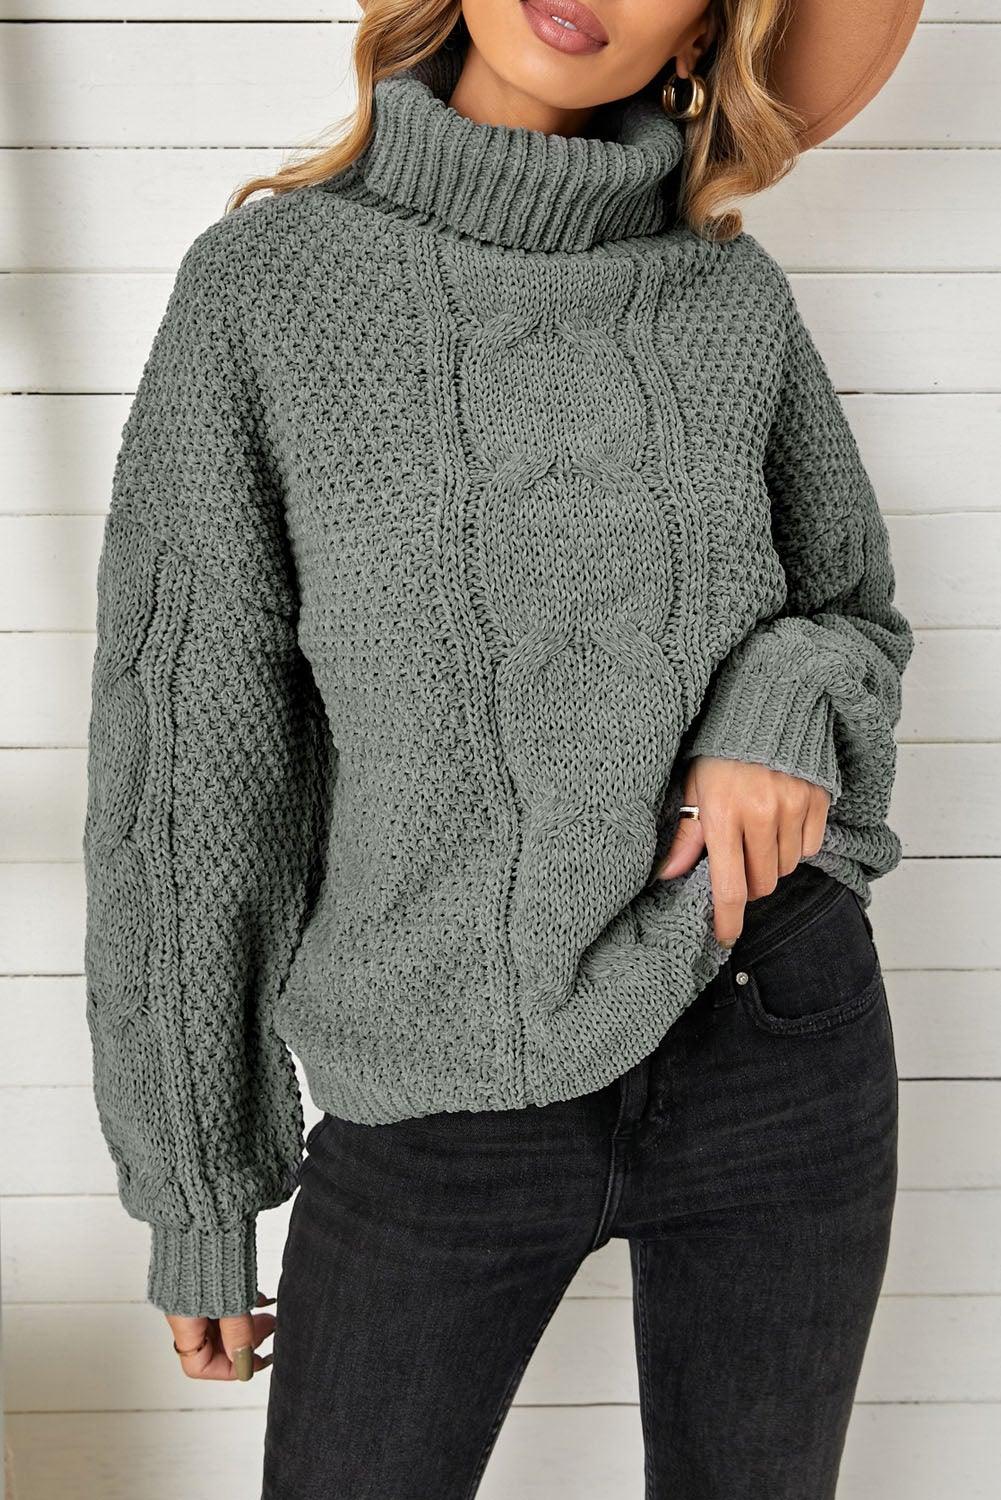 Solid Turtleneck Cable Knit Pullover Sweater - L & M Kee, LLC